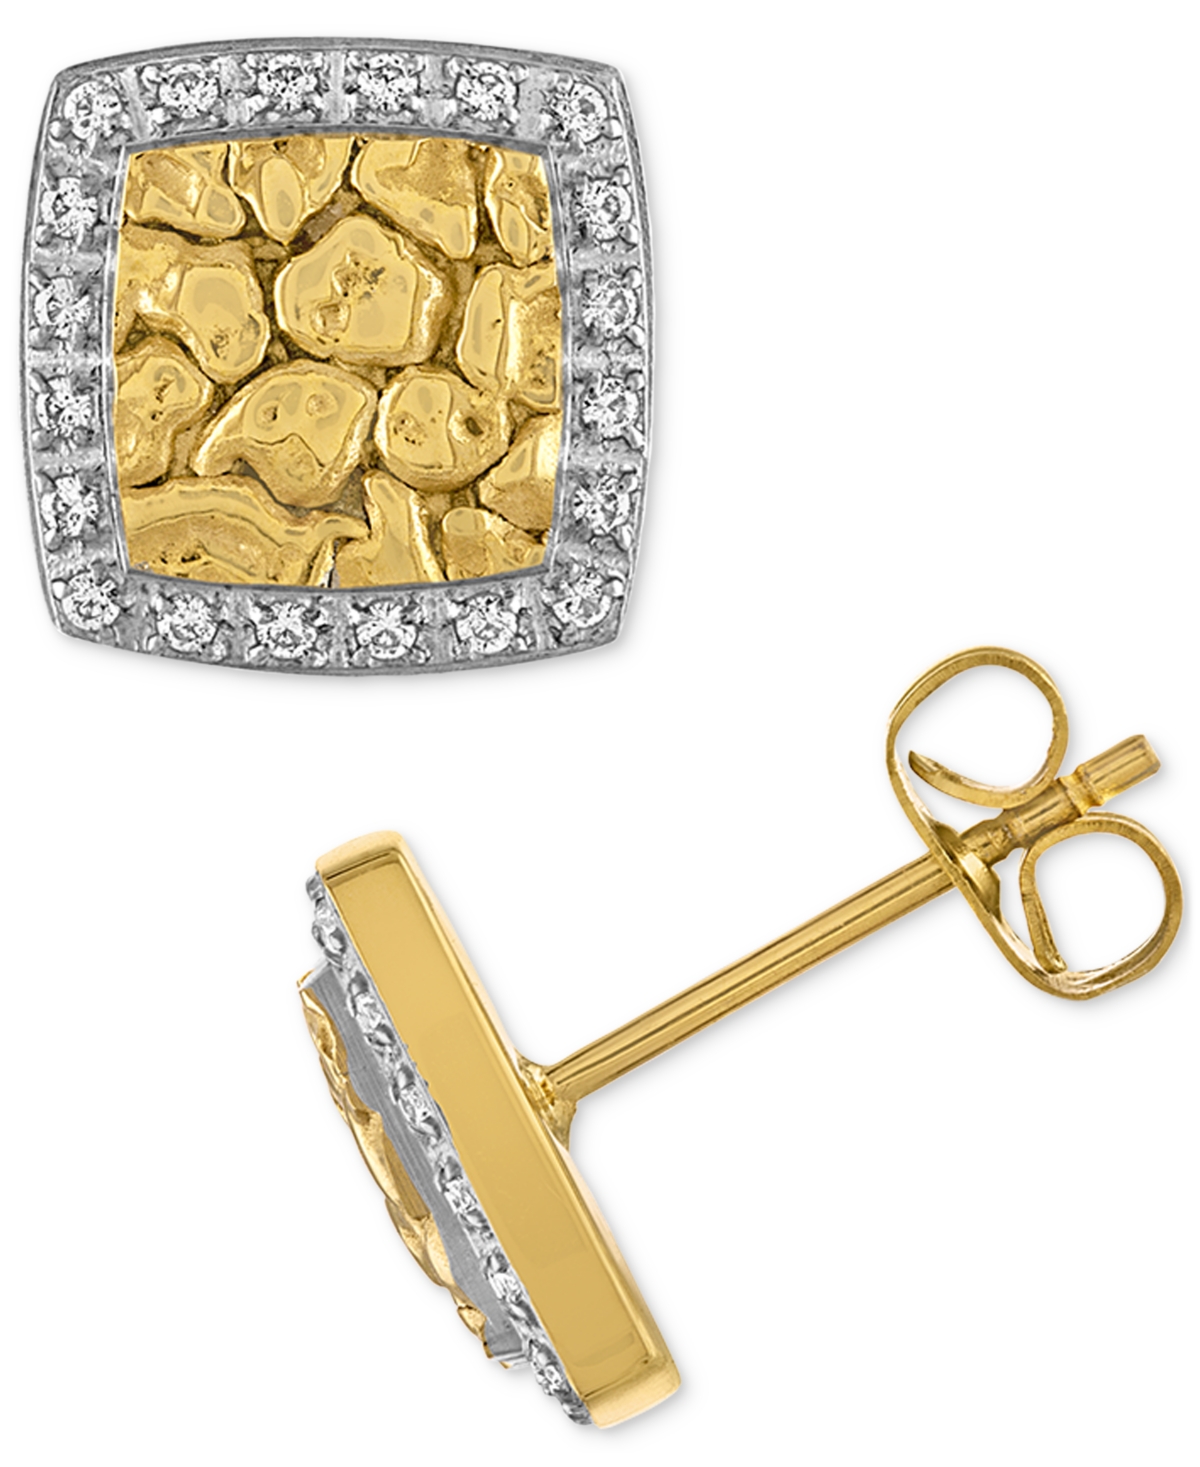 Diamond Nugget Stud Earrings (1/5 ct. t.w.) in Gold-Tone Ion-Plated Stainless Steel, Created for Macy's - Gold-Tone